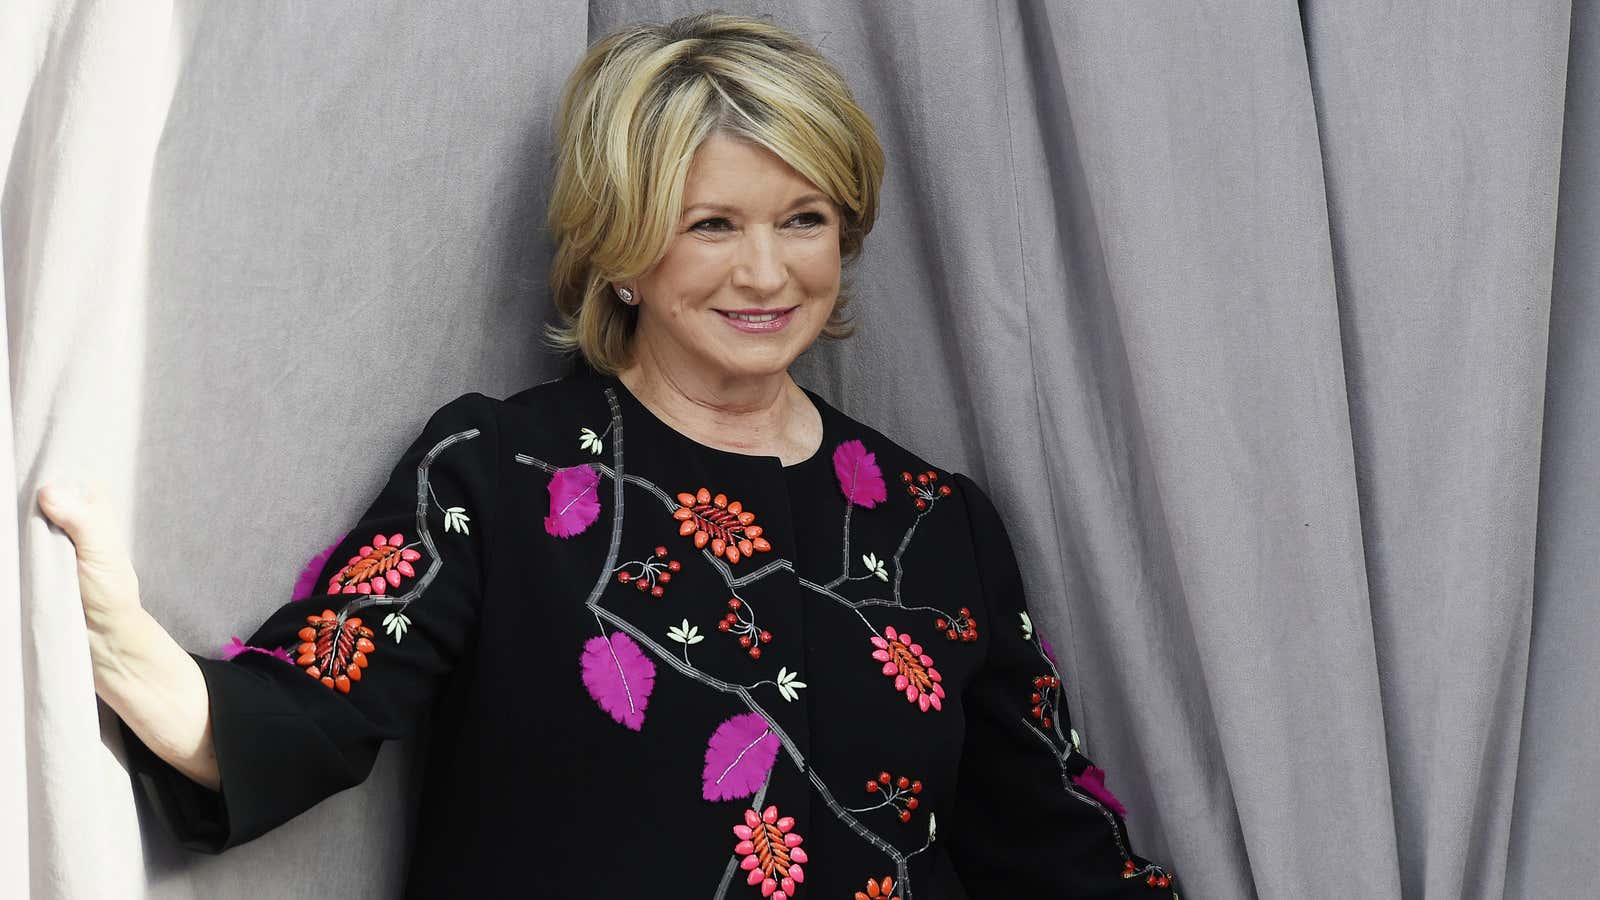 Life for Martha Stewart is pretty good after prison.